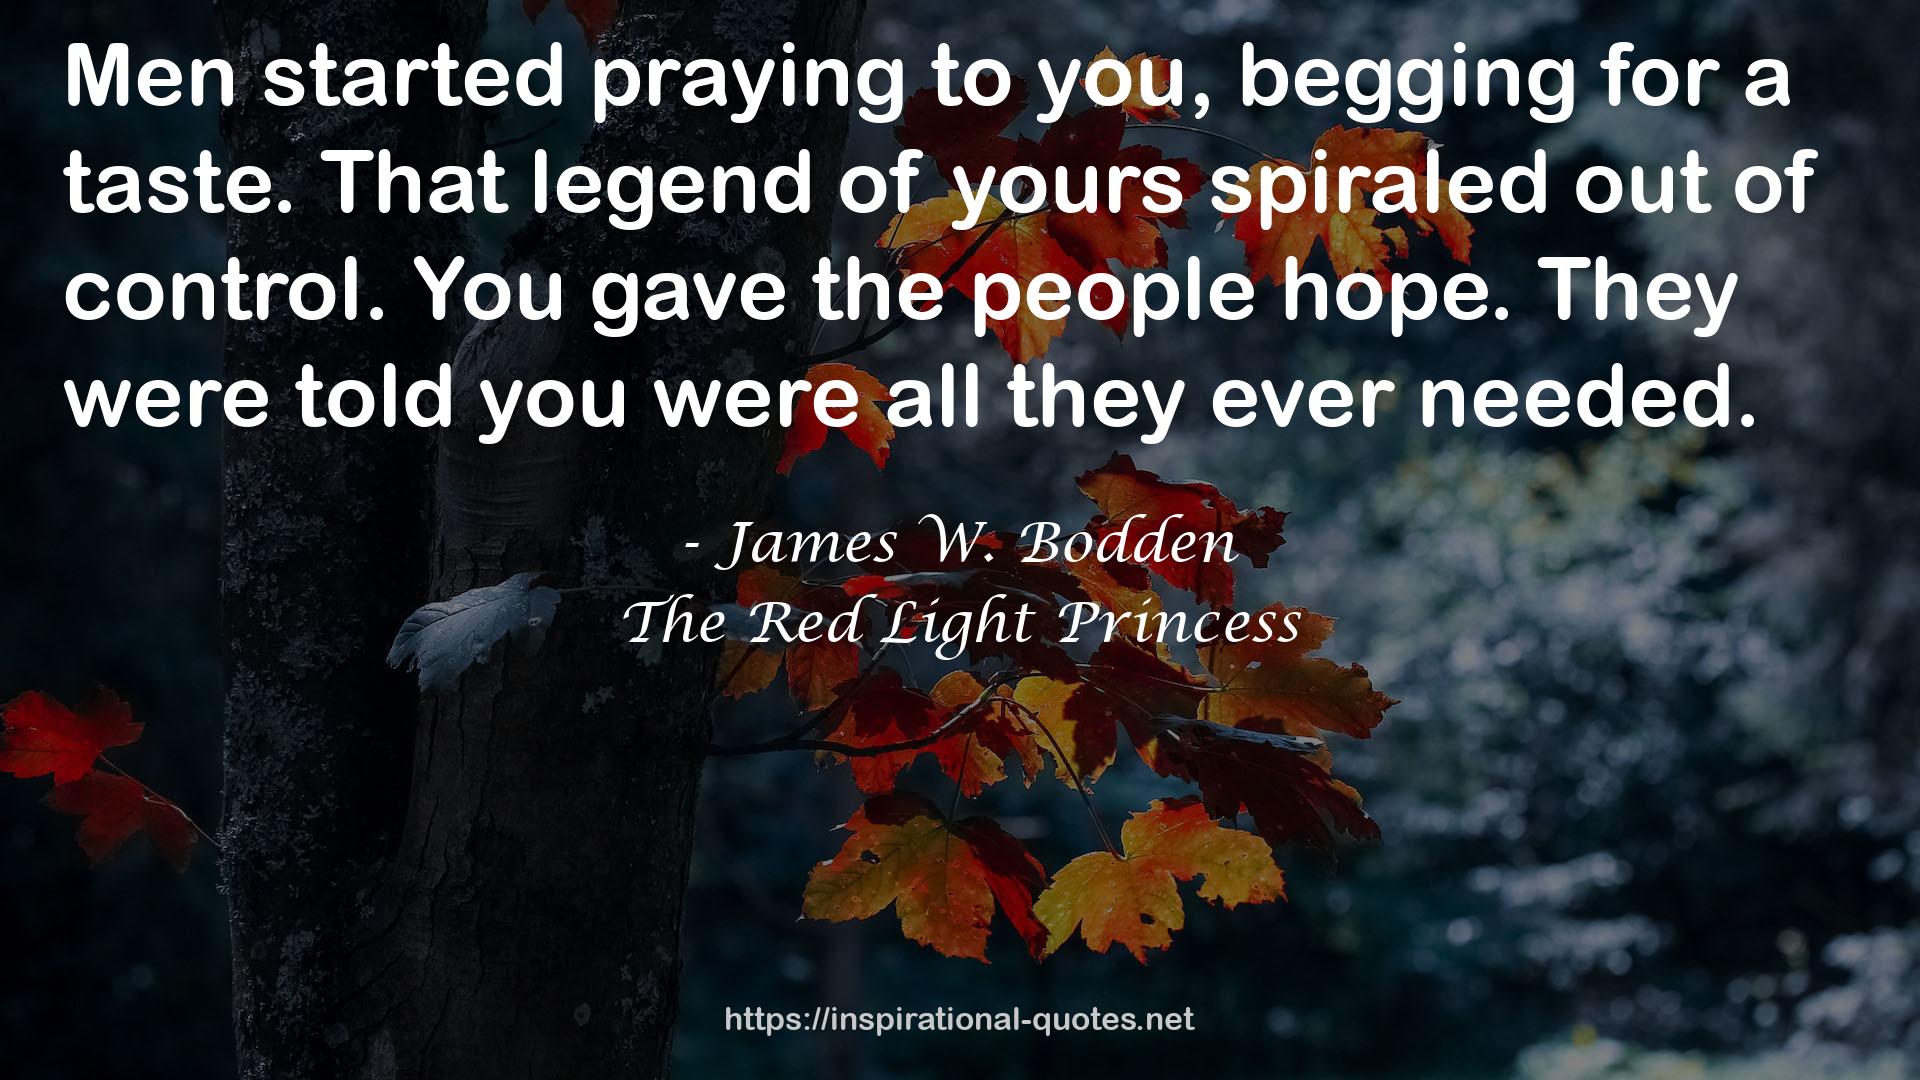 James W. Bodden QUOTES